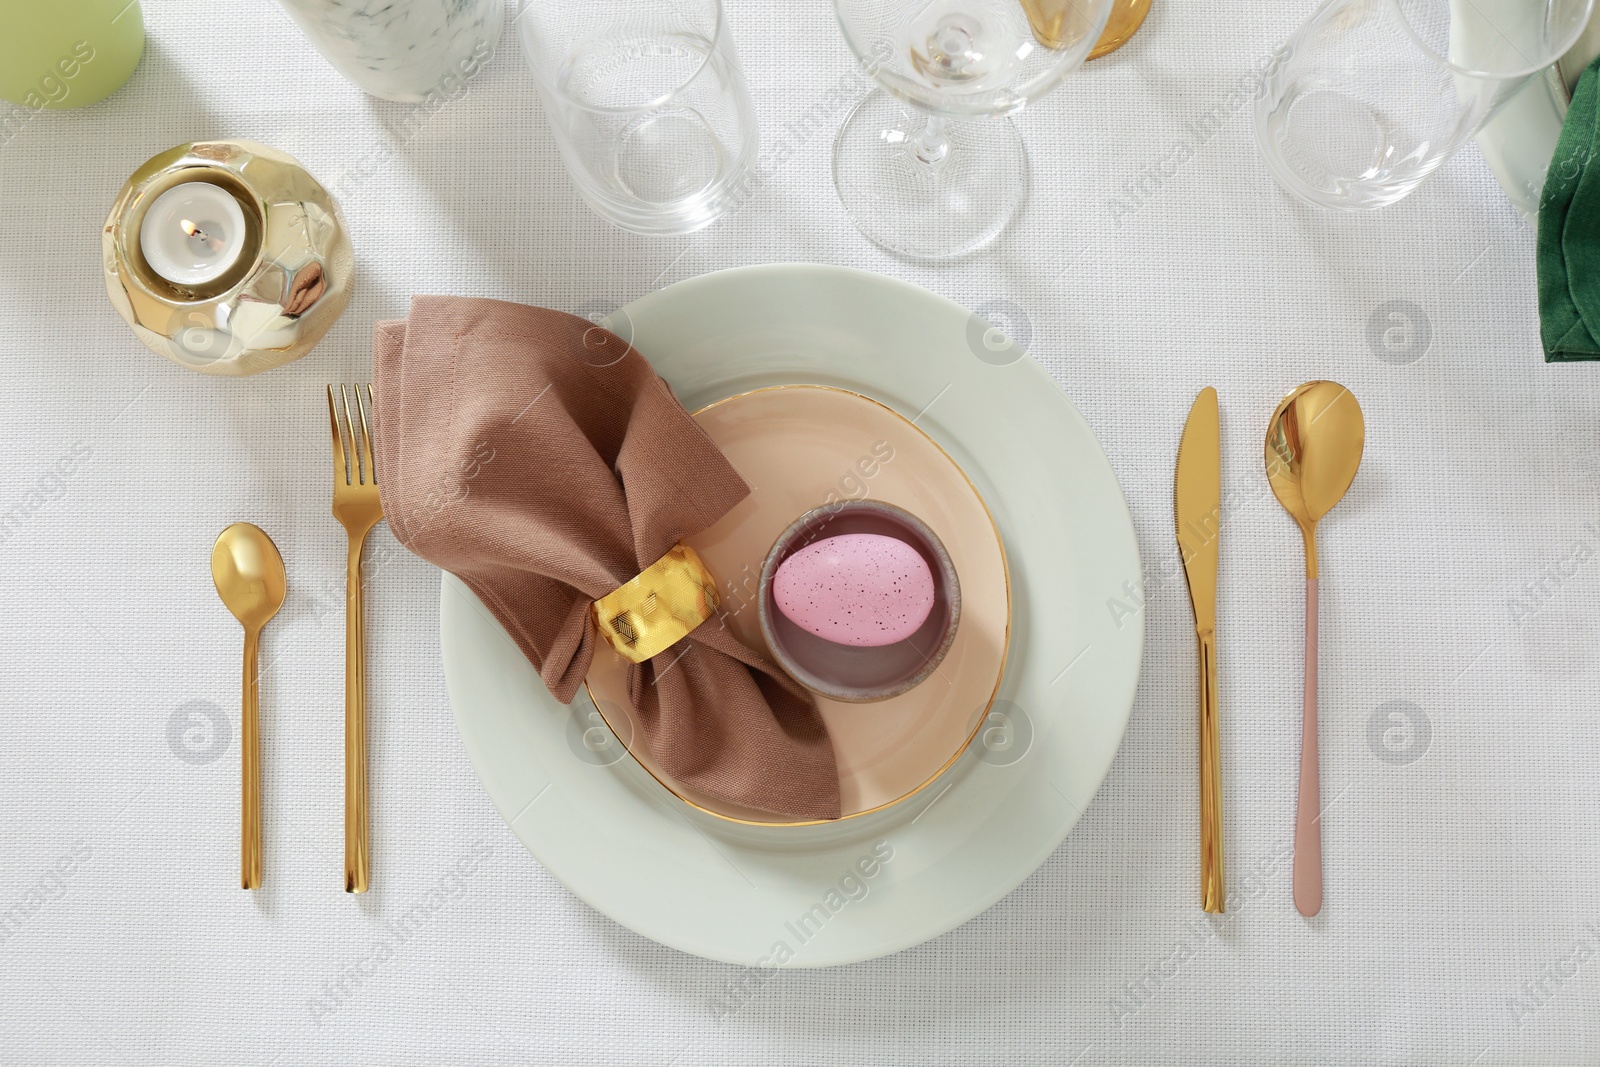 Photo of Festive Easter table setting with painted egg and burning candle, flat lay